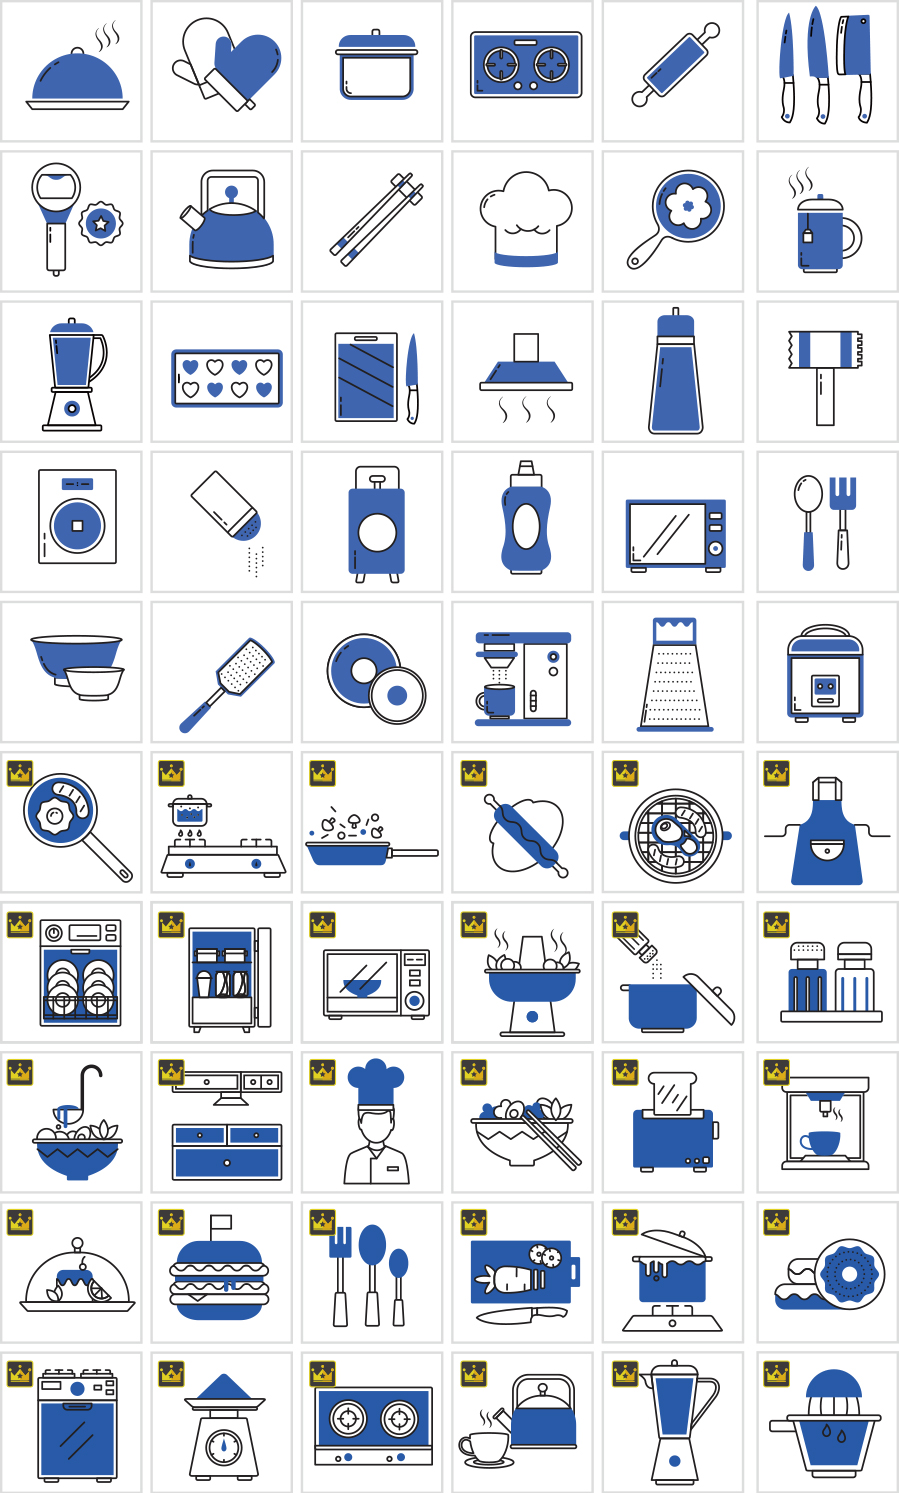 Kitchen tool icon material